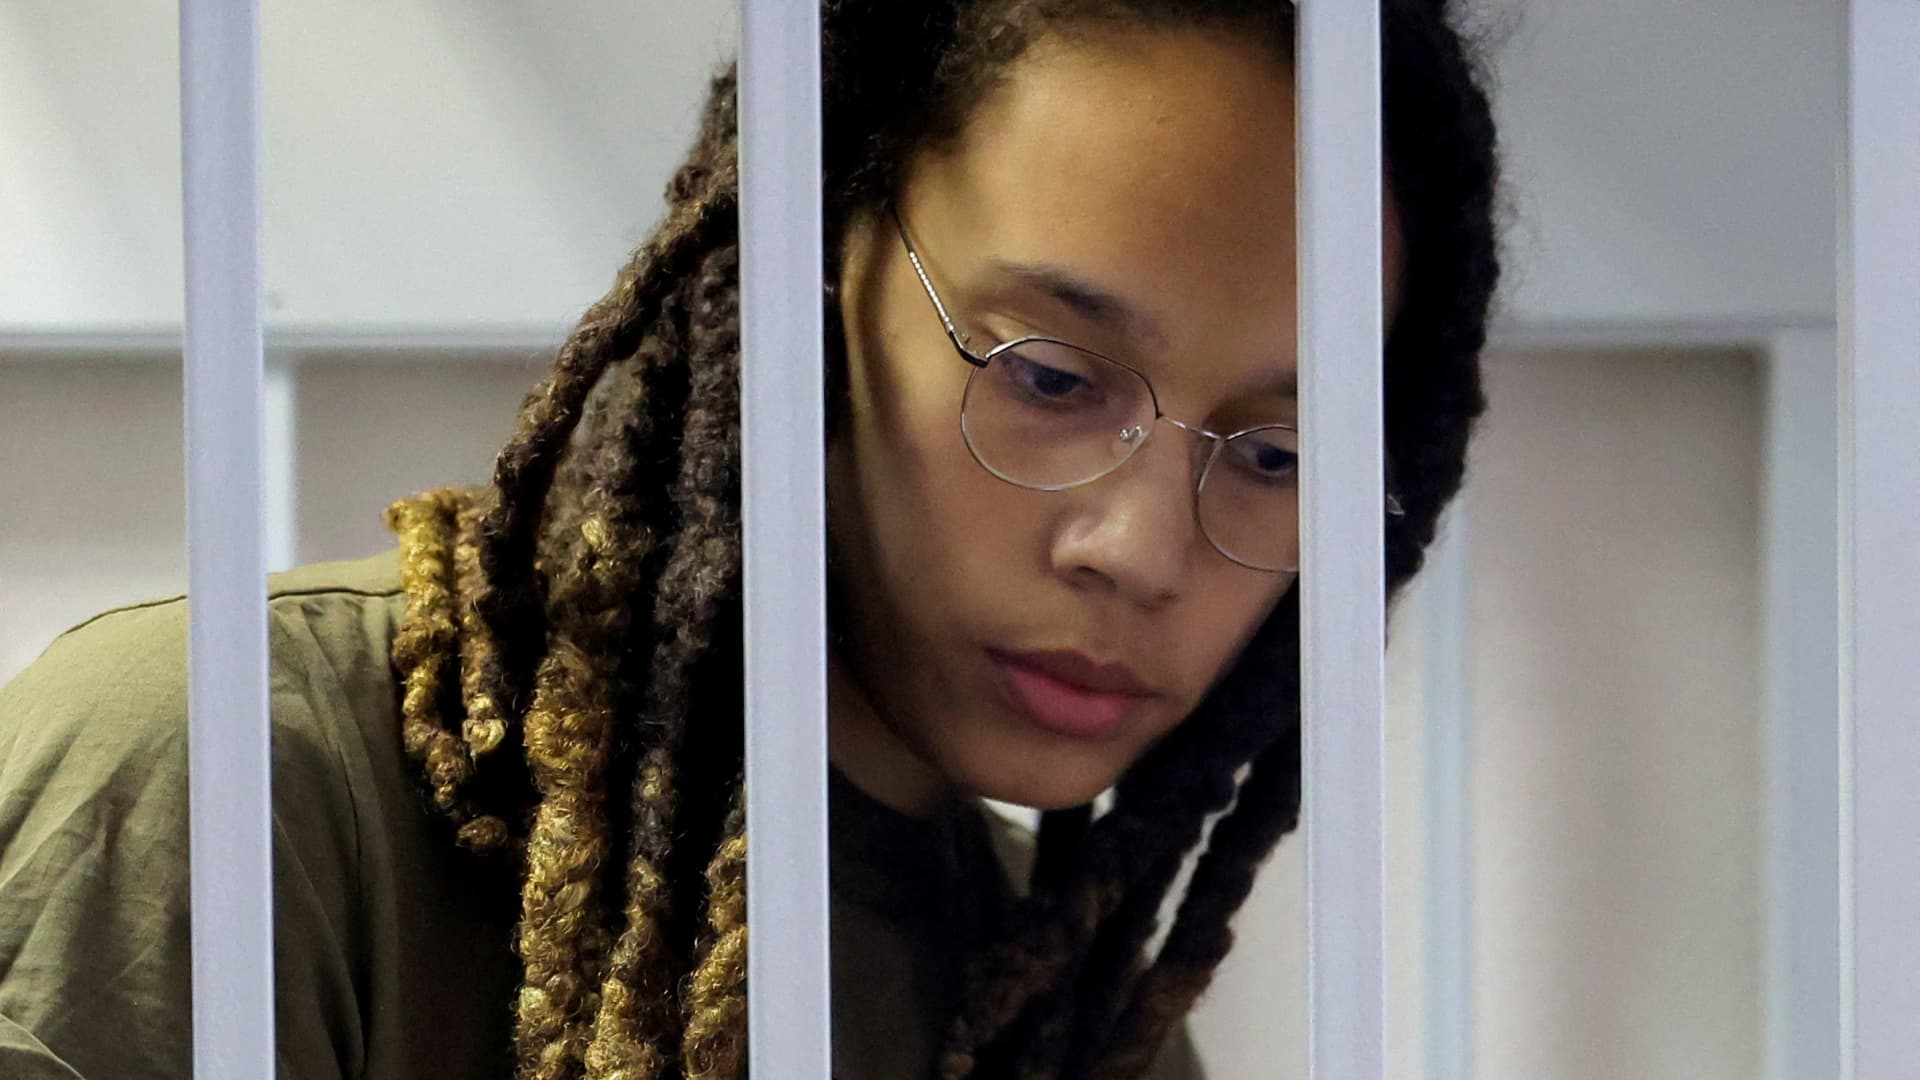 U.S. basketball player Brittney Griner, who was detained at Moscow's Sheremetyevo airport and later charged with illegal possession of cannabis, looks on inside a defendants' cage before a court hearing in Khimki outside Moscow, Russia August 2, 2022.